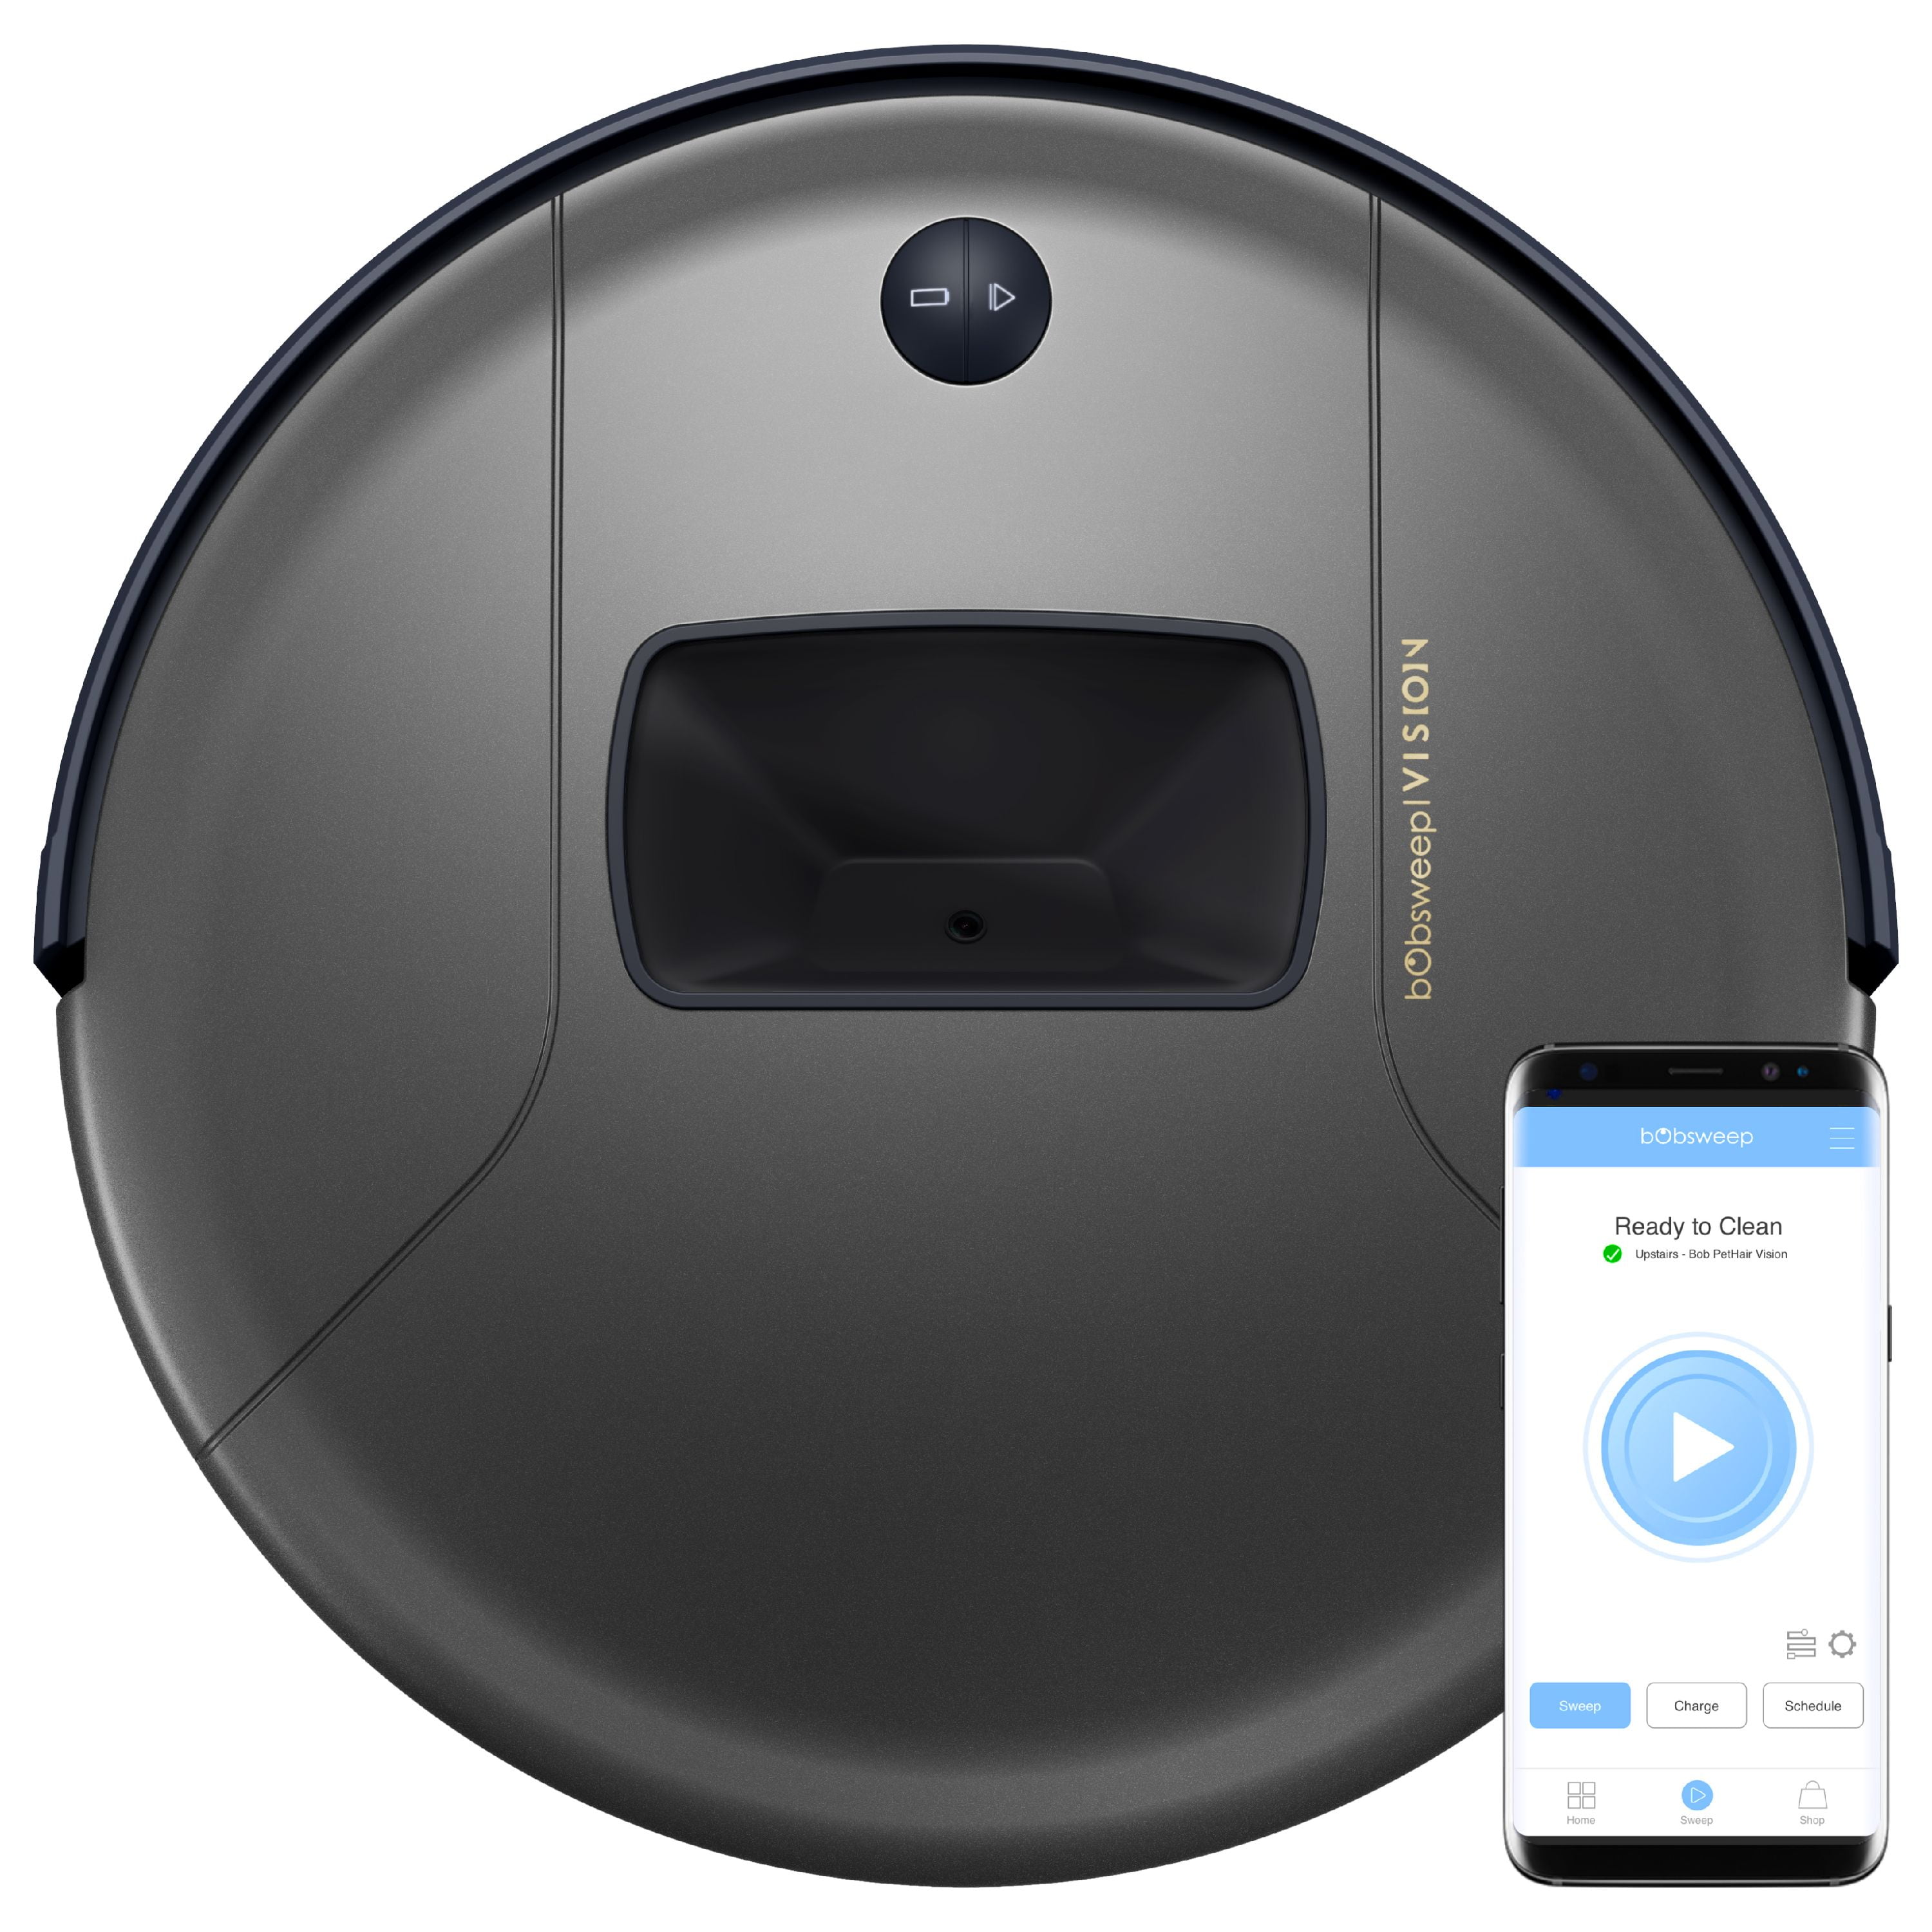 What's the Bobsweep Pethair Vision Wi-Fi Connected Robot Vacuum Cleaner best deal?